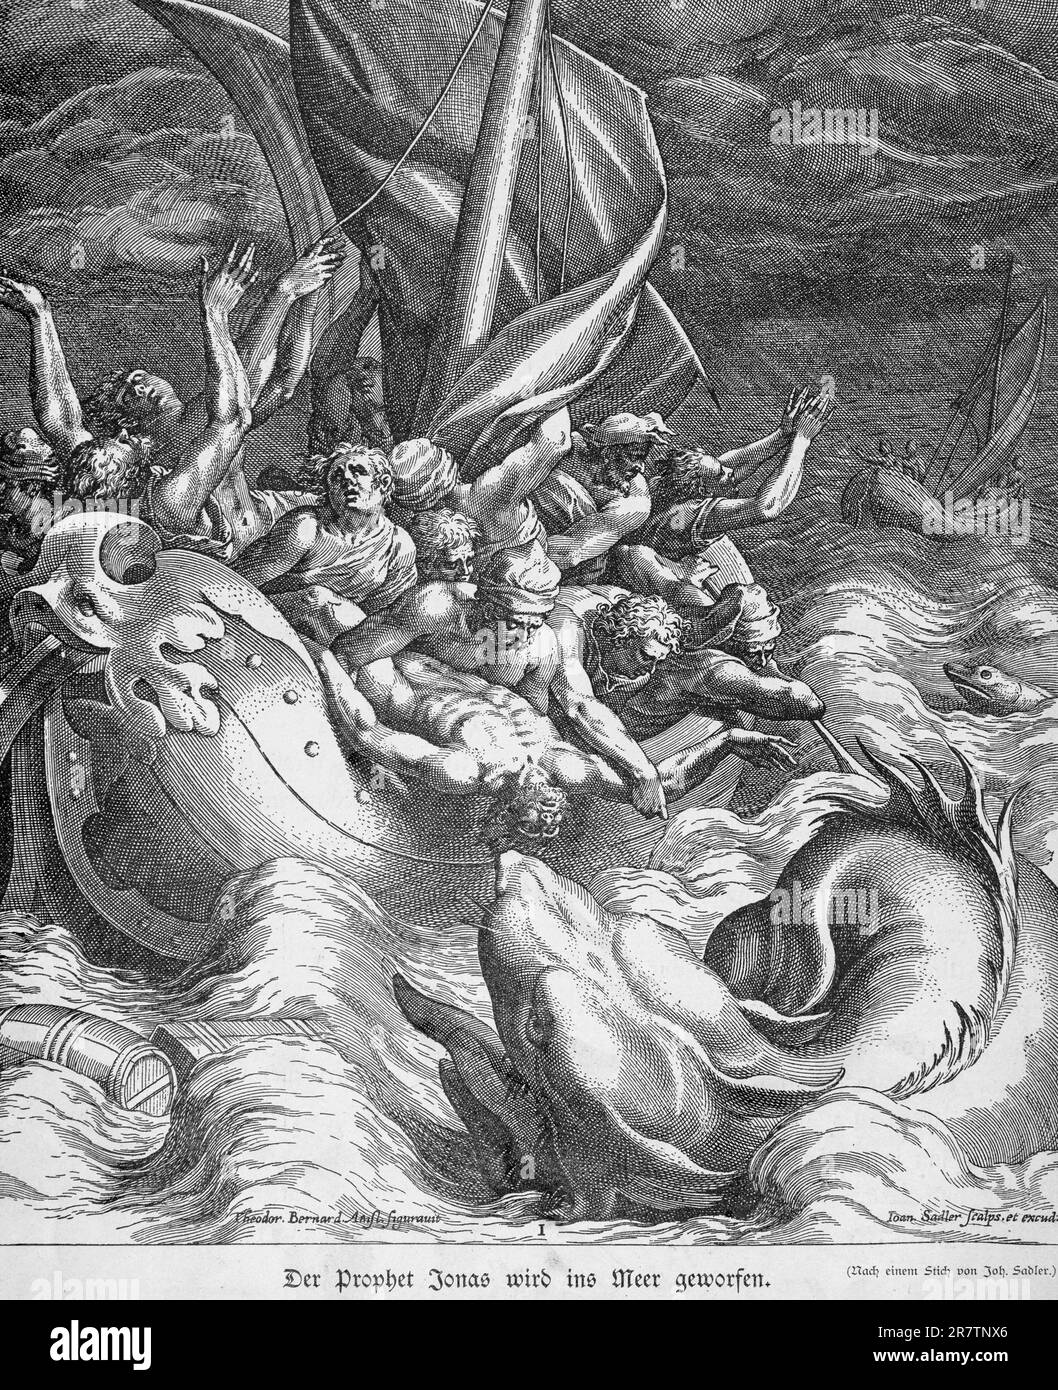 The prophet Jonah is thrown into the sea, Jonah, chapter 1, verses 1-16, Old Testament, Bible, boat, storm, tempest, rain, dark clouds, sky, high Stock Photo